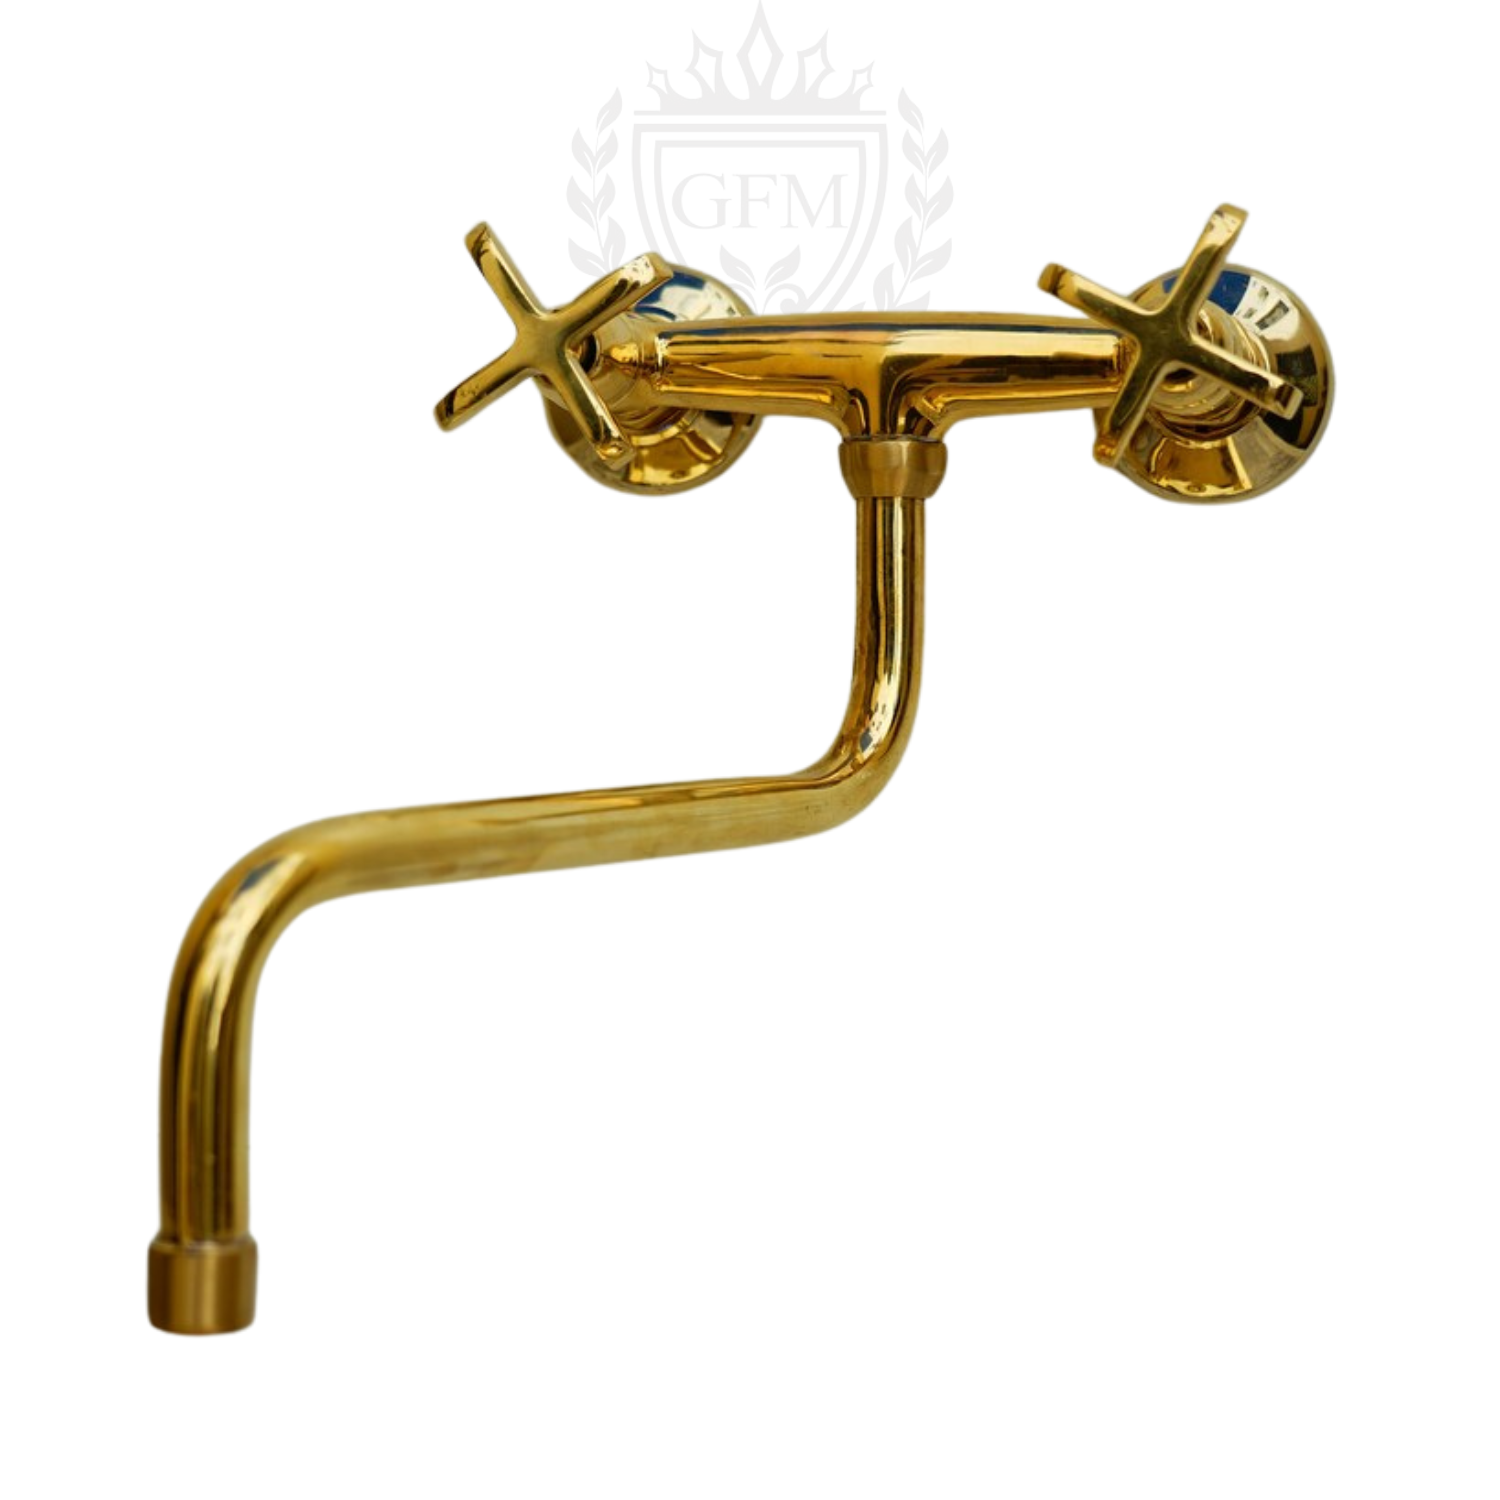 Unlacquered Brass Wall Mounted Kitchen Faucet | Handcrafted Solid Brass Faucet with Cross Handles